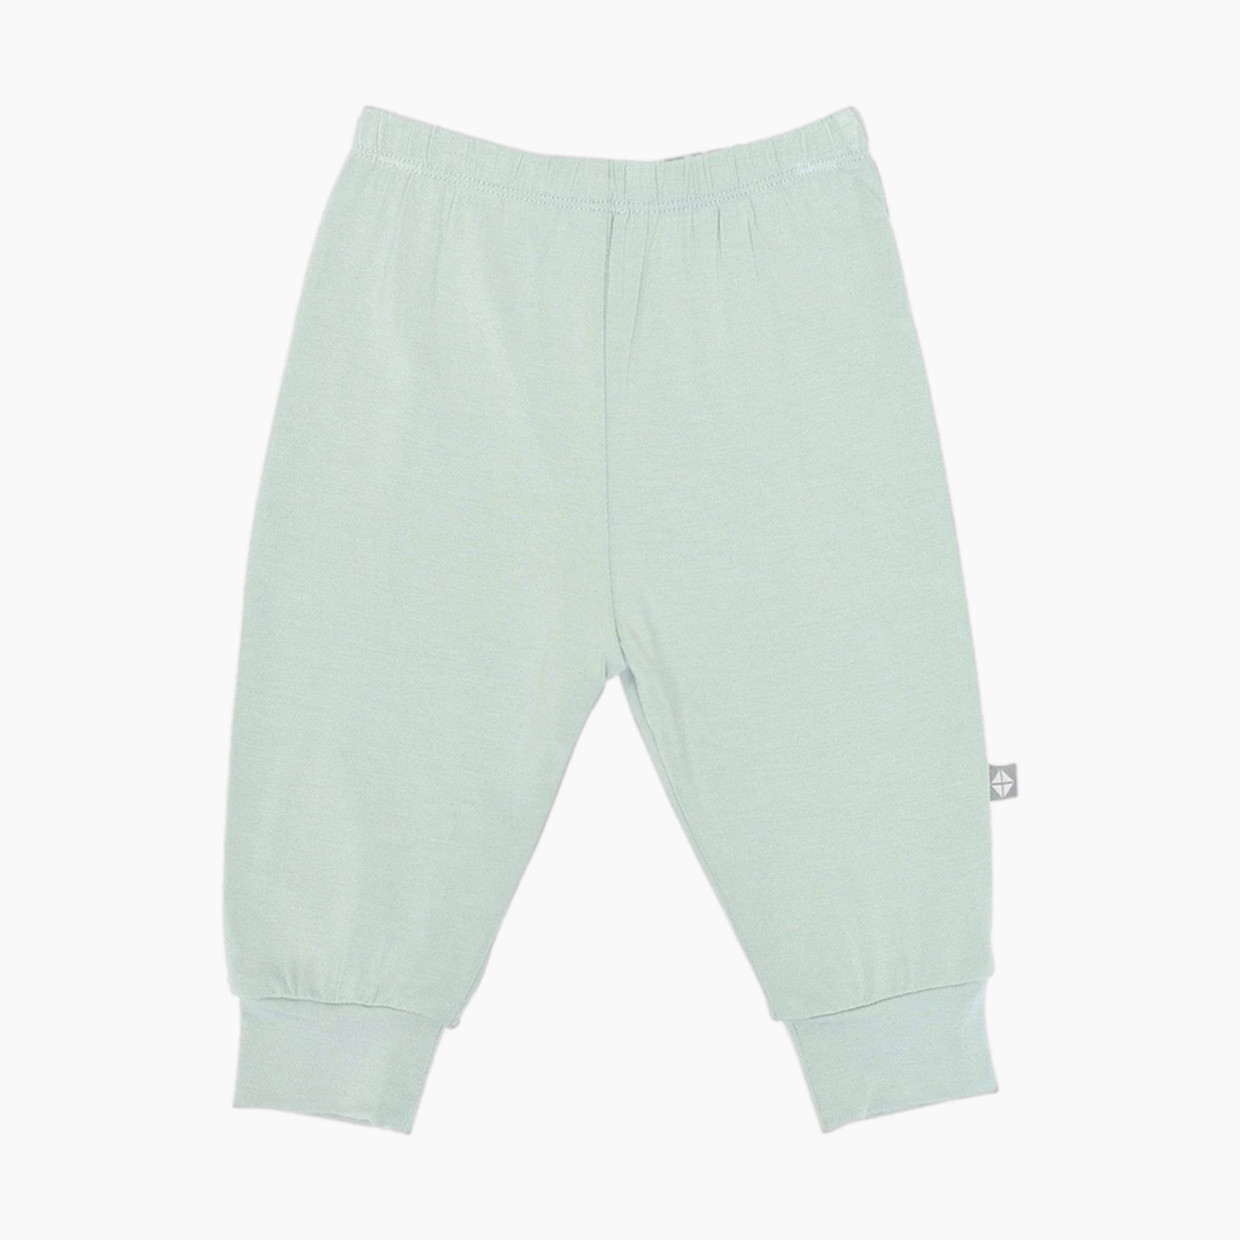 Kyte Baby Pant - Sage, 3-6 Months.